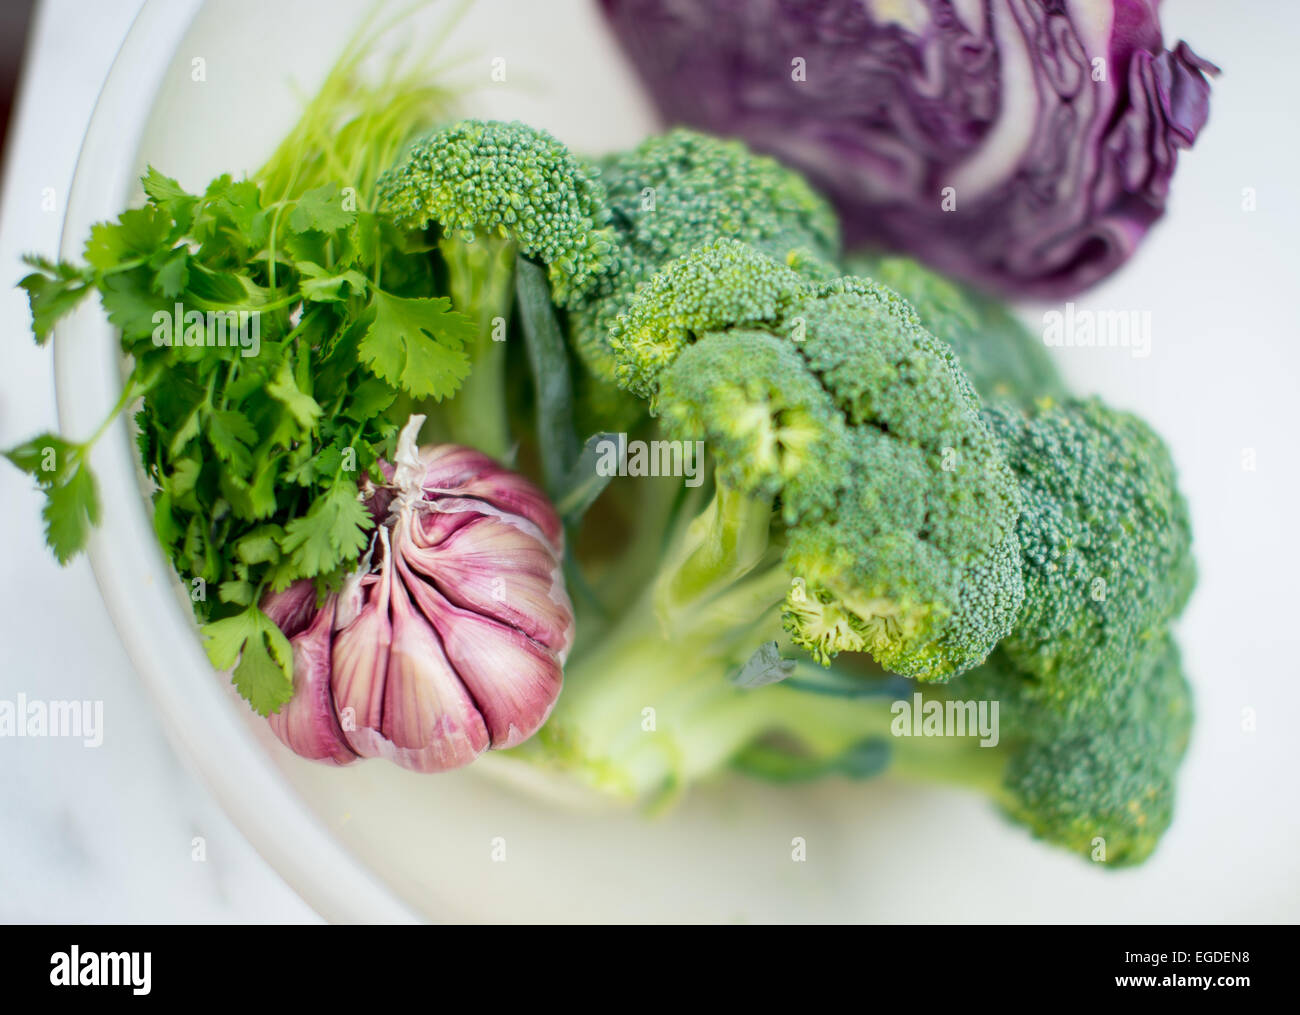 Broccoli, garlic cloves and red cabbage and coriander on a white plate in preparation for cooking. Stock Photo